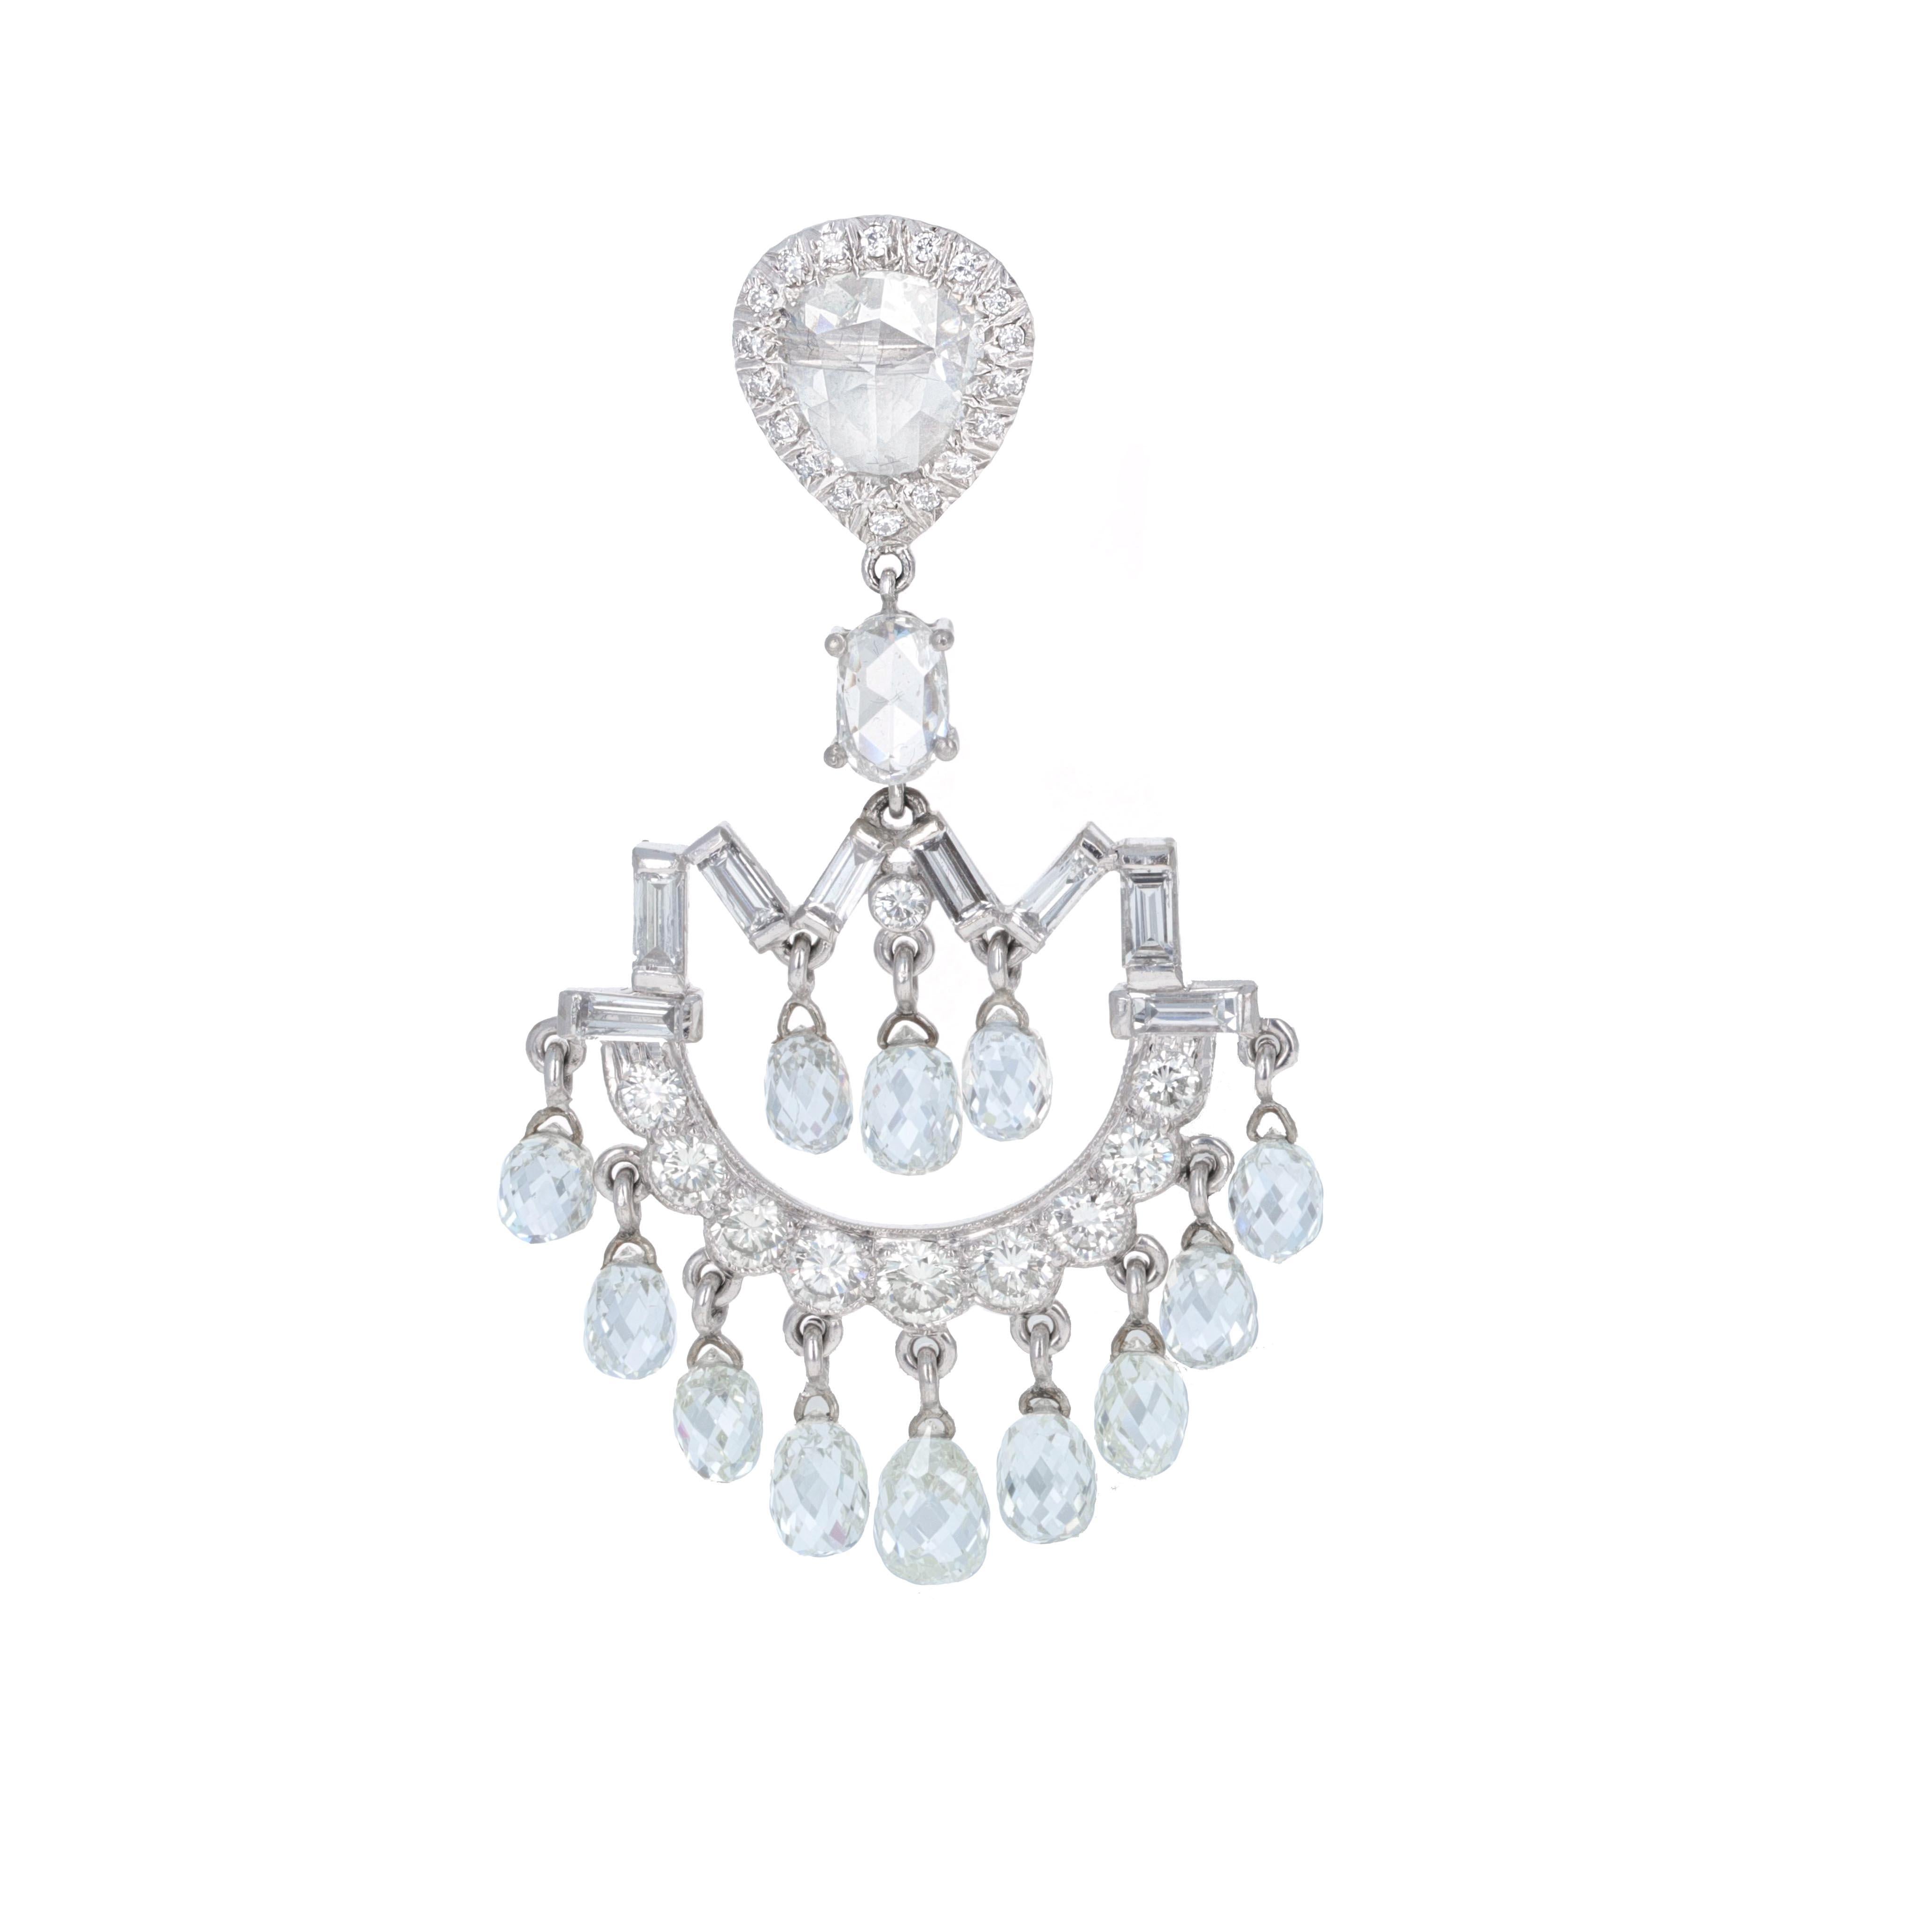 Beautifully designed estate diamond briolelle dangling earrings. The earrings are made in 18 karat white gold. The top of the earrings feature pear shaped rose cut diamonds. These chandelier earring are made to look Art Deco. There are 76 diamonds